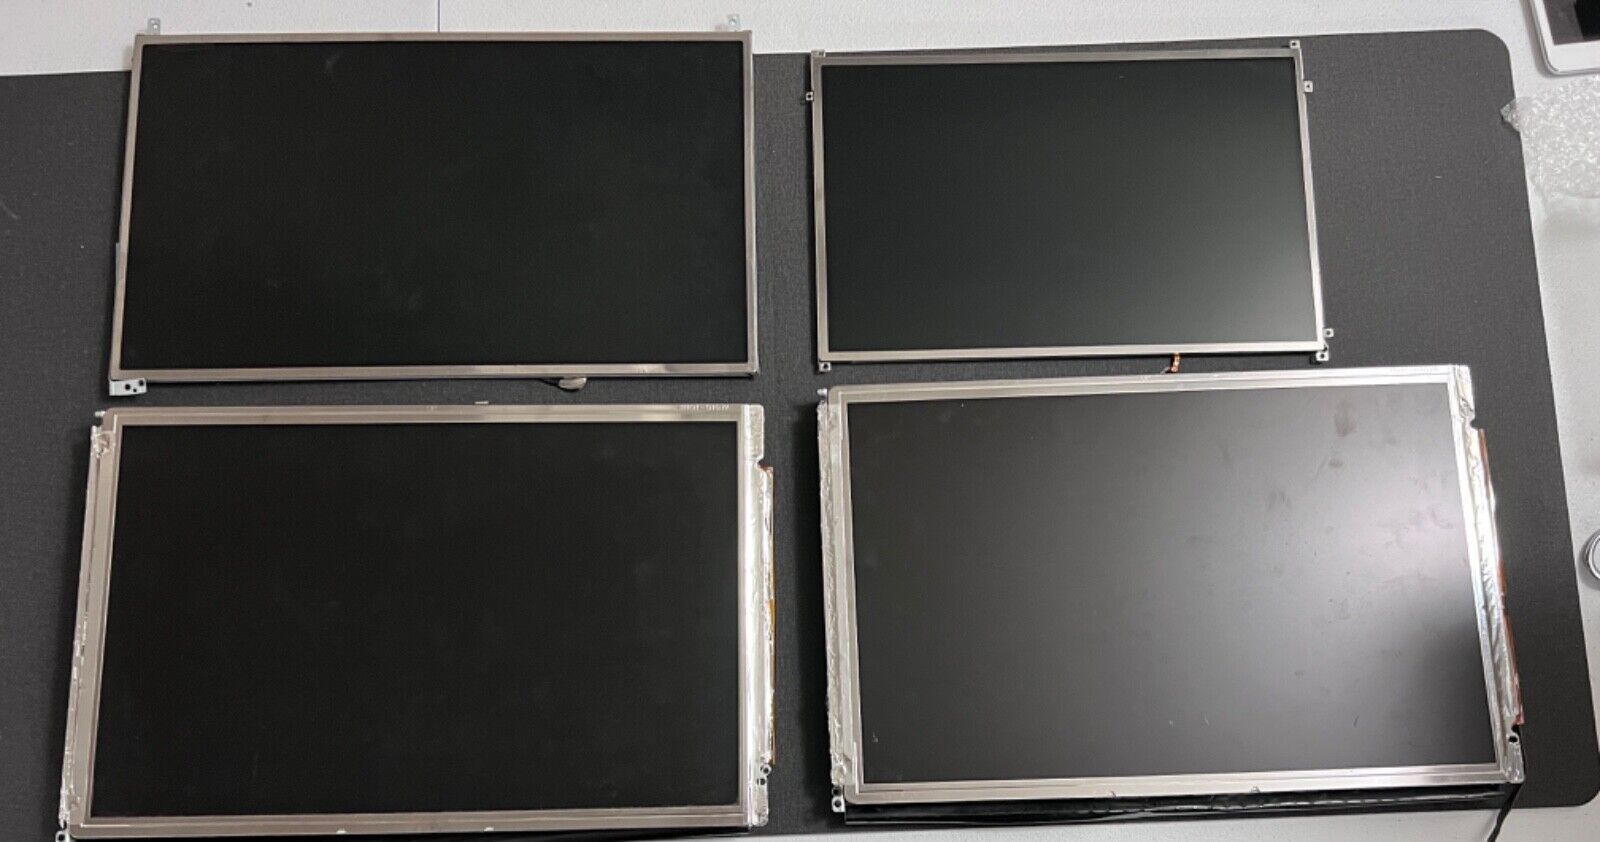 Lot of 4 Used LCD Displays LG LP173WD1 + LP141WX5 + (2) LM171W02